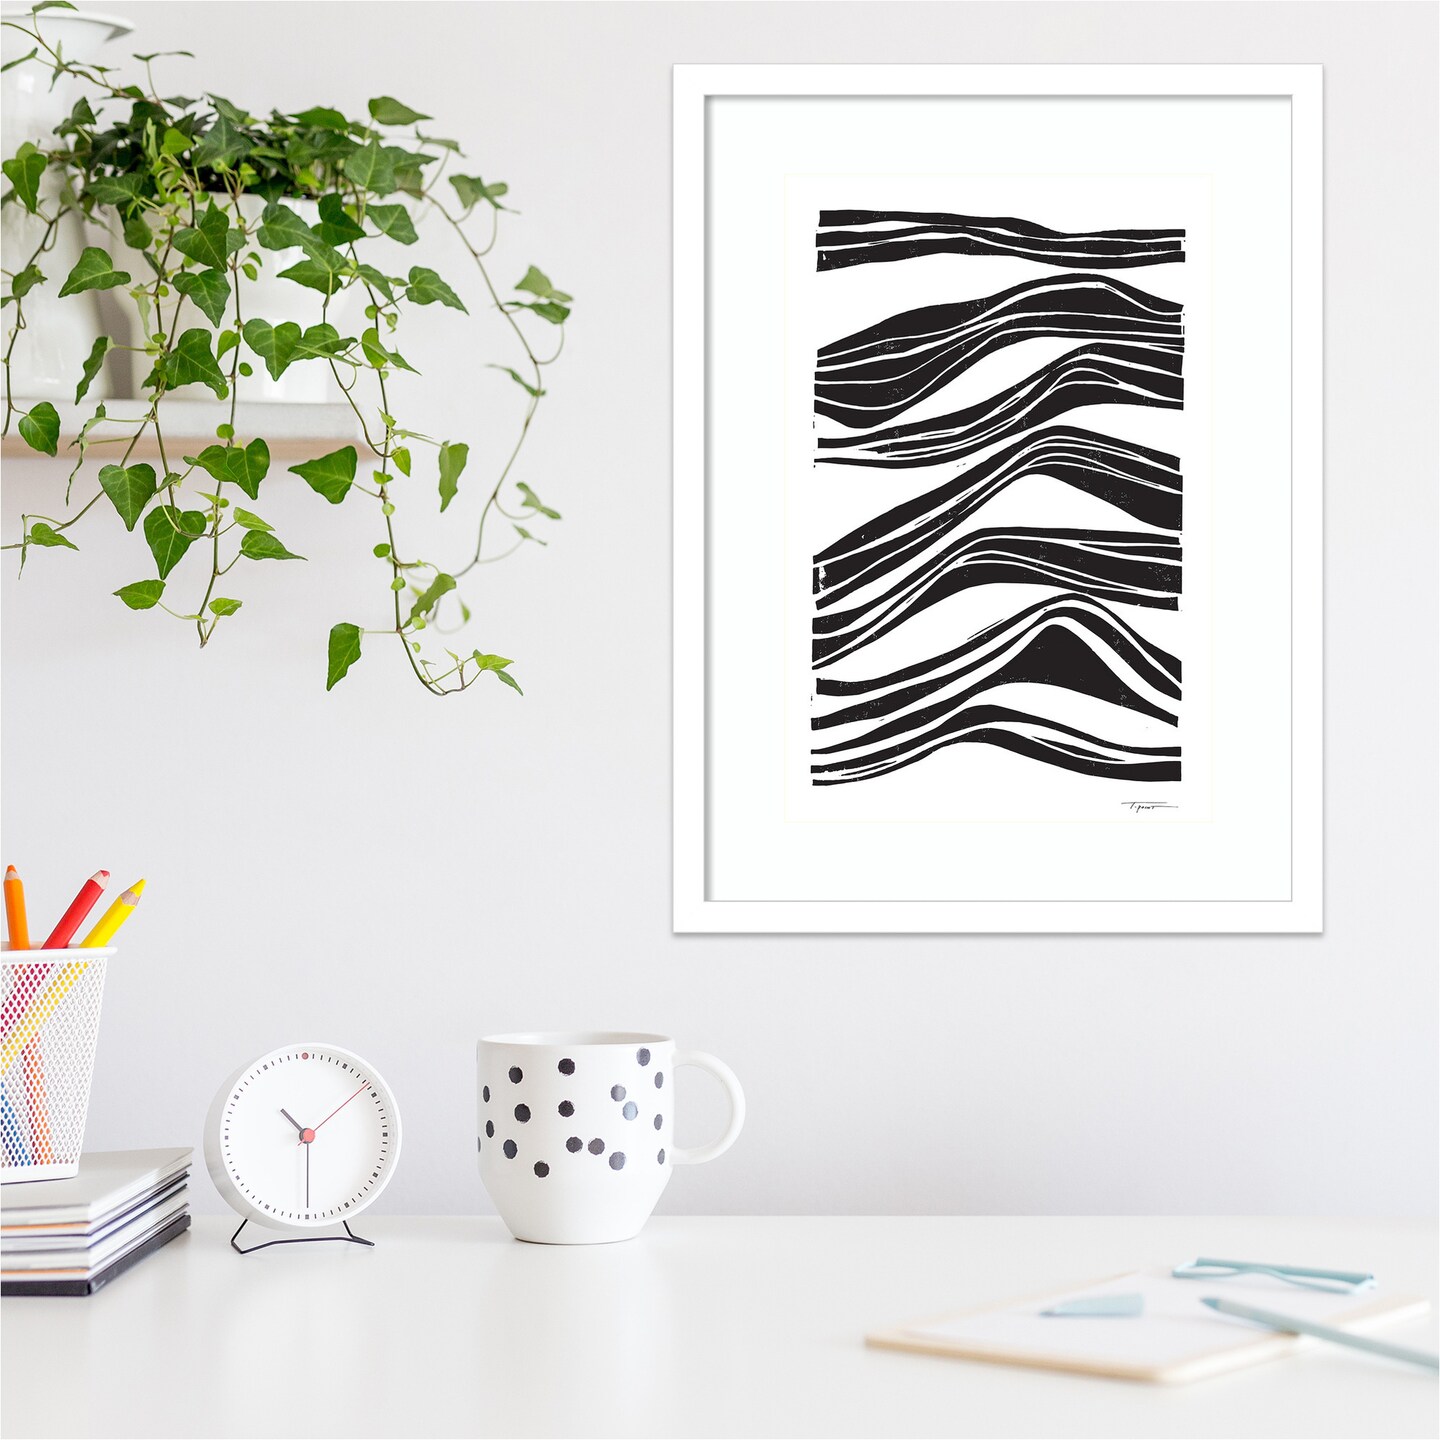 Abstract Waves by Statement Goods Wood Framed Wall Art Print